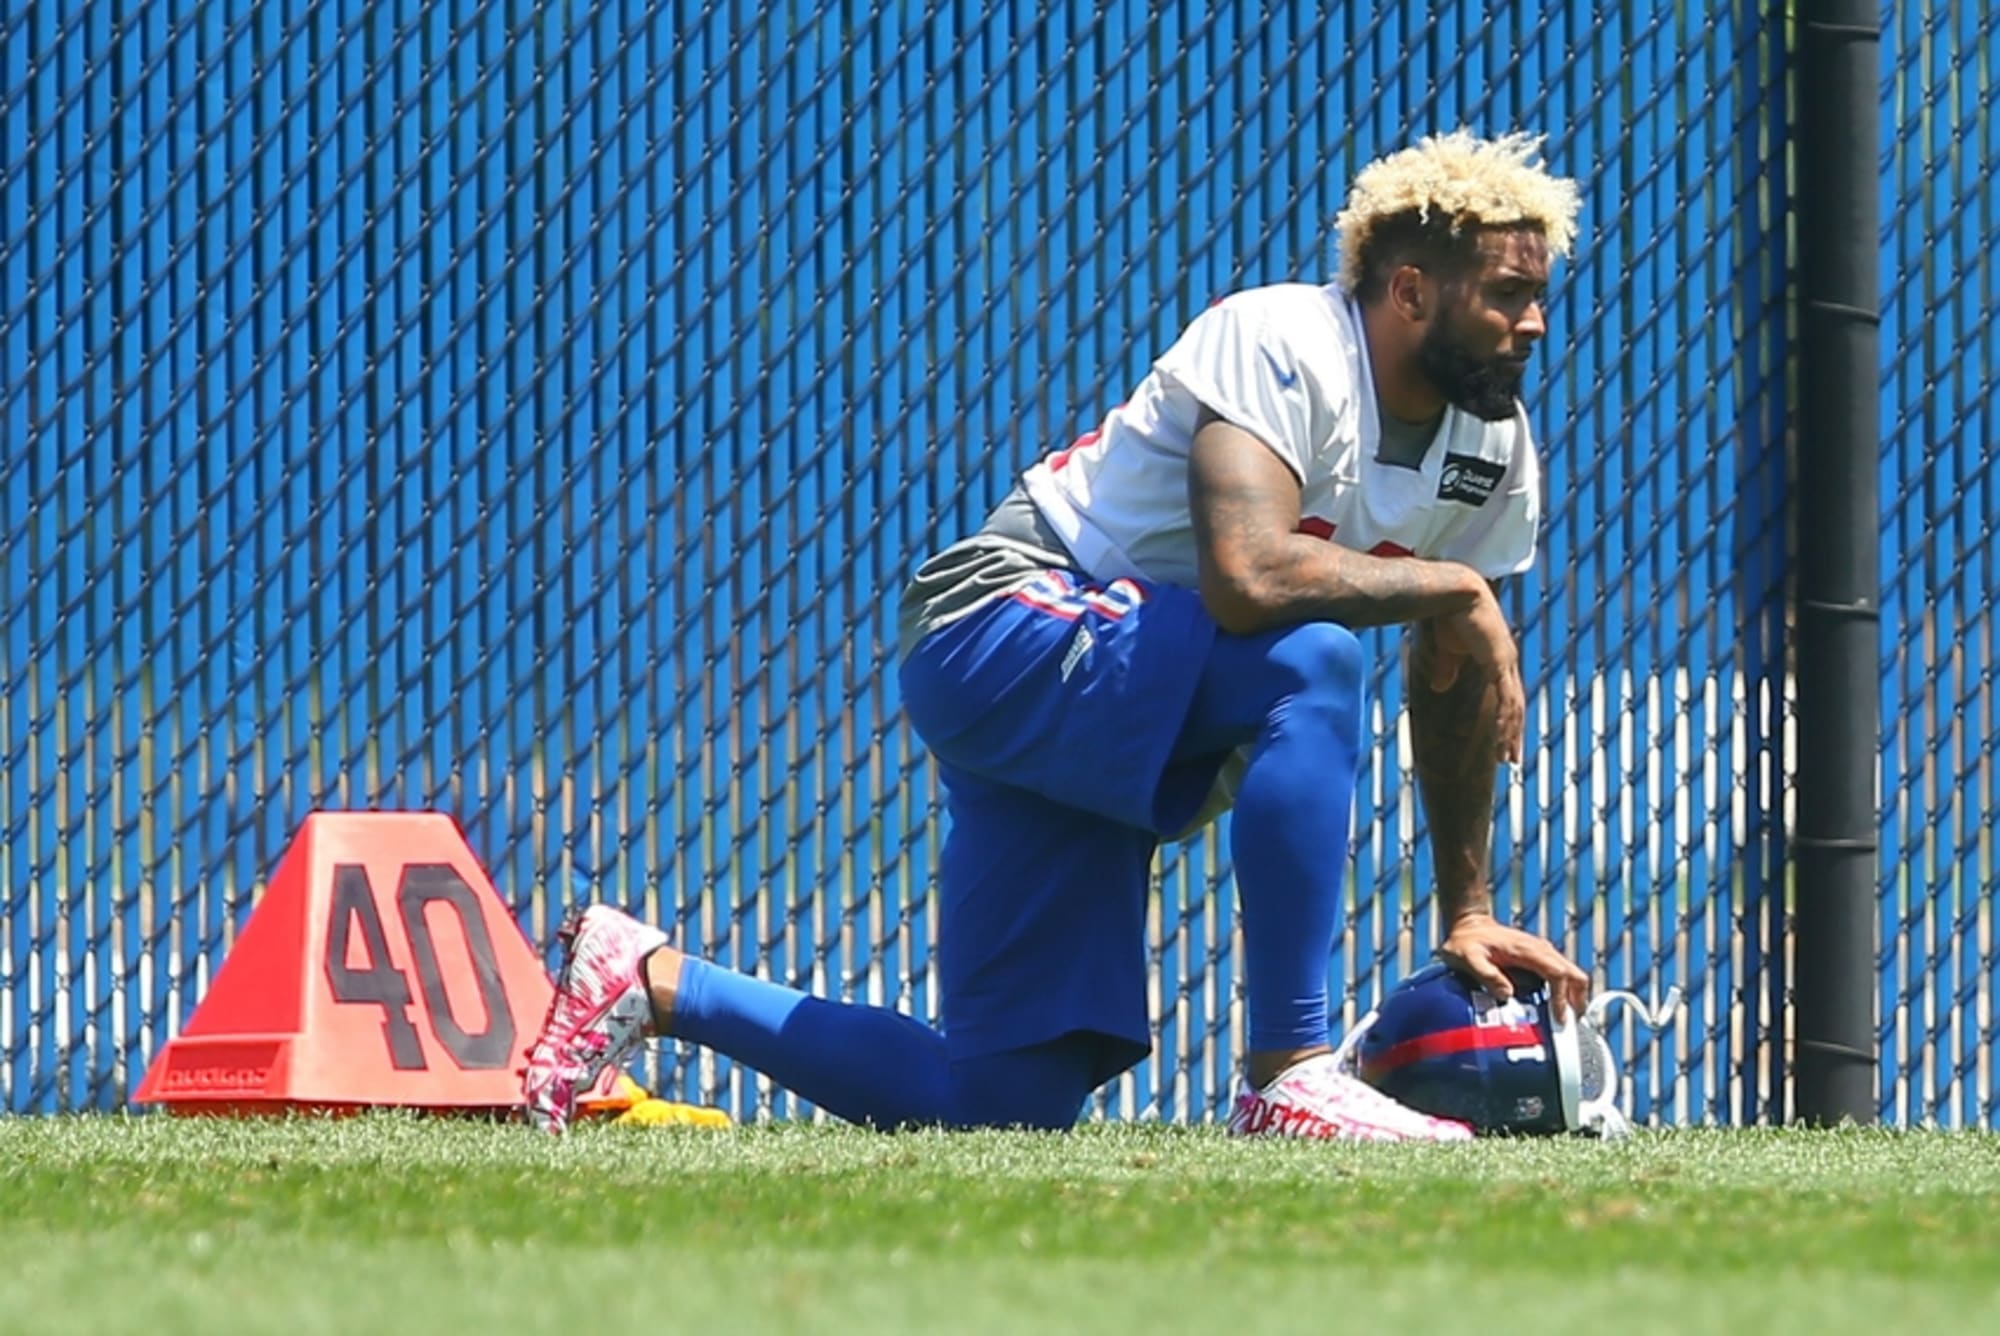 New York Giants: The Best Odell Jr. Still to Come